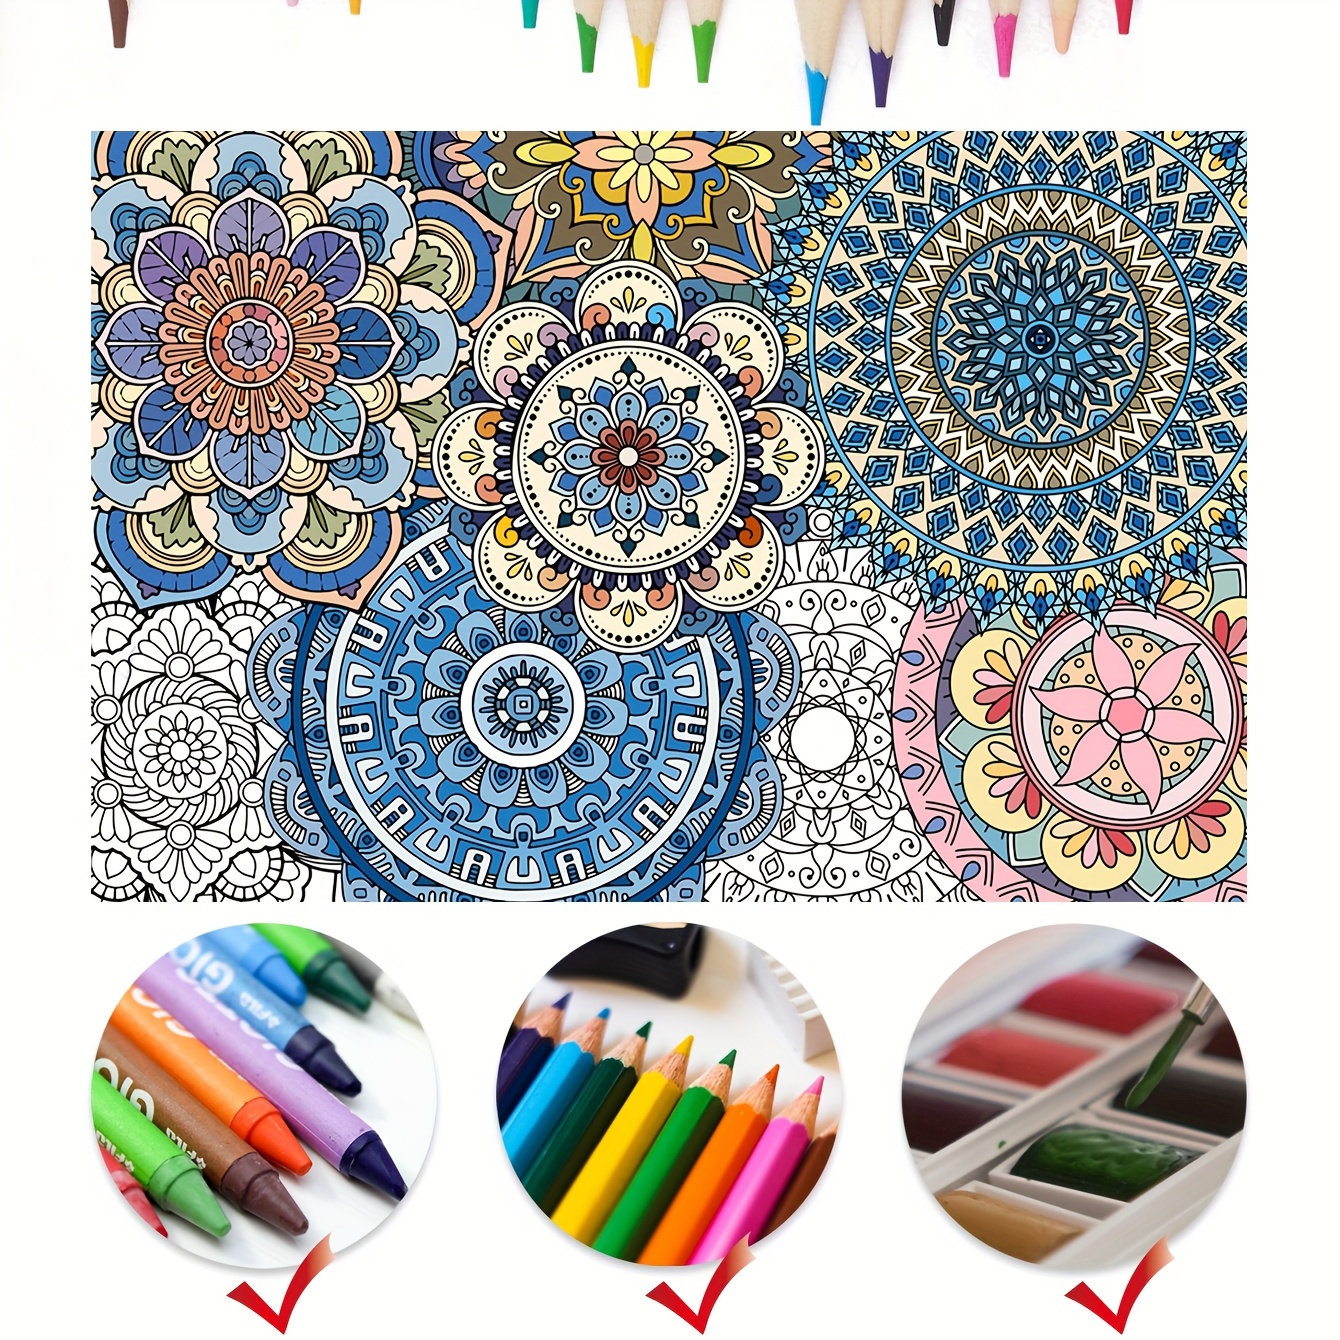 Giant Mandala Coloring Poster Jumbo Flower Drawing Paper 72 x 30 Inch Large  Coloring Tablecloth for Adults kids Teens Coloring Books Bulk Coloring